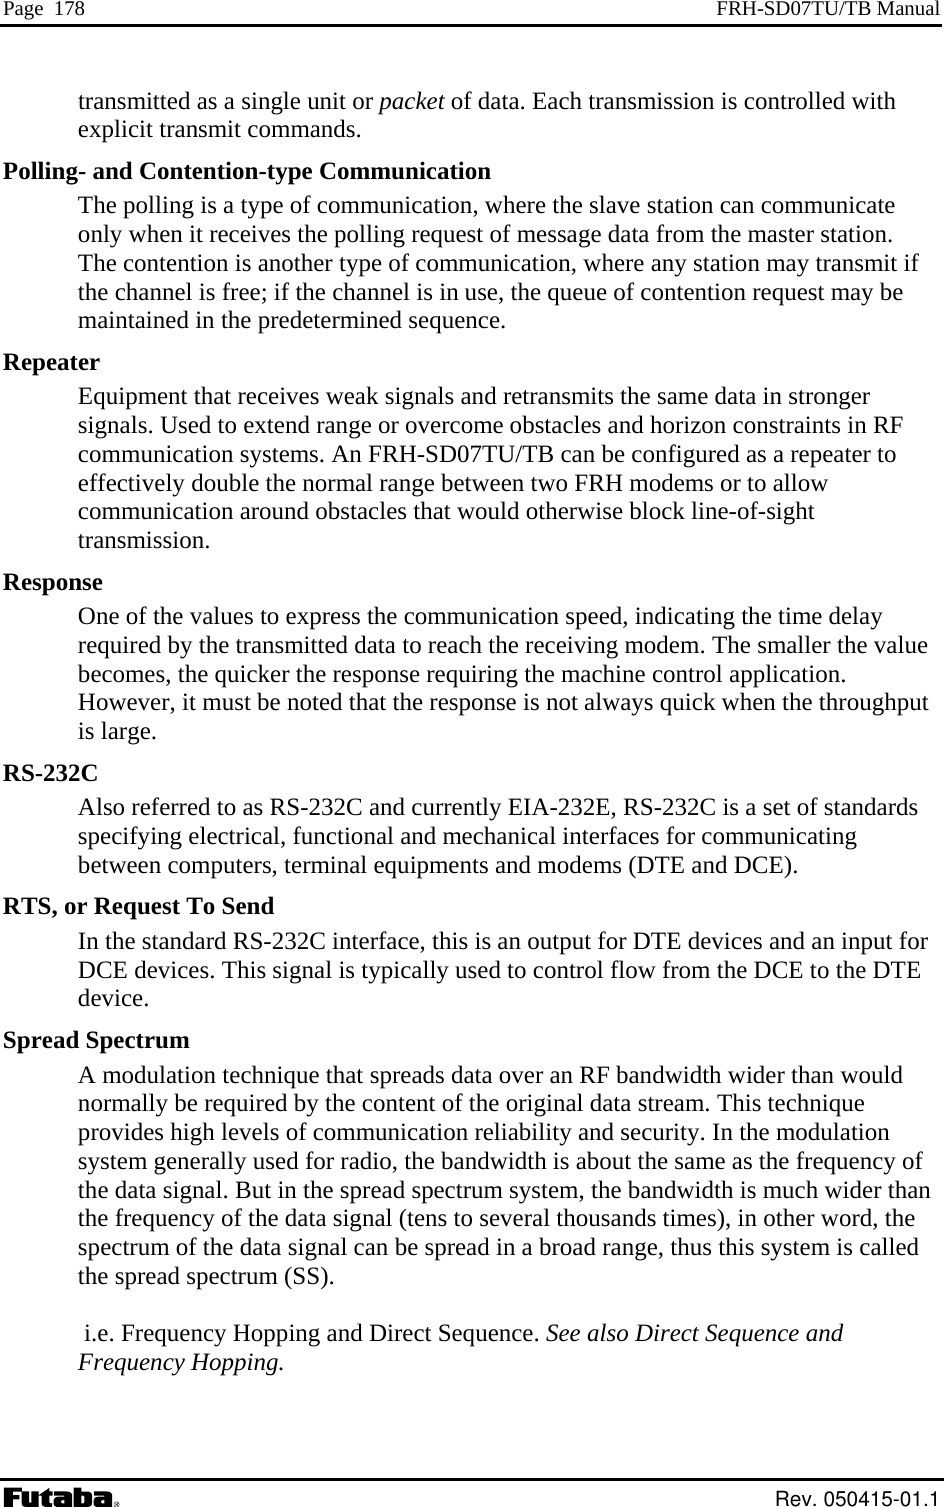 Page  178  FRH-SD07TU/TB Manual transmitted as a single unit or packet of data. Each transmission is controlled with explicit transmit commands. - and Contention-type Communication Pollinghe polling is a type of communication, where the slave station can communicate ication, where any station may transmit if nel is free; if the channel is in use, the queue of contention request may be Repeat signals and retransmits the same data in stronger Used to extend range or overcome obstacles and horizon constraints in RF can be configured as a repeater to Responr the value pplication. owever, it must be noted that the response is not always quick when the throughput RS-232RTS, oSpreadn technique that spreads data over an RF bandwidth wider than would   Hopping and Direct Sequence. See also Direct Sequence and Tonly when it receives the polling request of message data from the master station.  The contention is another type of communthe chanmaintained in the predetermined sequence. er Equipment that receives weaksignals. communication systems. An FRH-SD07TU/TB effectively double the normal range between two FRH modems or to allow communication around obstacles that would otherwise block line-of-sight transmission. se One of the values to express the communication speed, indicating the time delay required by the transmitted data to reach the receiving modem. The smallebecomes, the quicker the response requiring the machine control aHis large. C Also referred to as RS-232C and currently EIA-232E, RS-232C is a set of standards specifying electrical, functional and mechanical interfaces for communicating between computers, terminal equipments and modems (DTE and DCE). r Request To Send In the standard RS-232C interface, this is an output for DTE devices and an input for DCE devices. This signal is typically used to control flow from the DCE to the DTE device.  Spectrum A modulationormally be required by the content of the original data stream. This technique provides high levels of communication reliability and security. In the modulation system generally used for radio, the bandwidth is about the same as the frequency of the data signal. But in the spread spectrum system, the bandwidth is much wider than the frequency of the data signal (tens to several thousands times), in other word, the spectrum of the data signal can be spread in a broad range, thus this system is calledthe spread spectrum (SS).   i.e. FrequencyFrequency Hopping.   Rev. 050415-01.1 